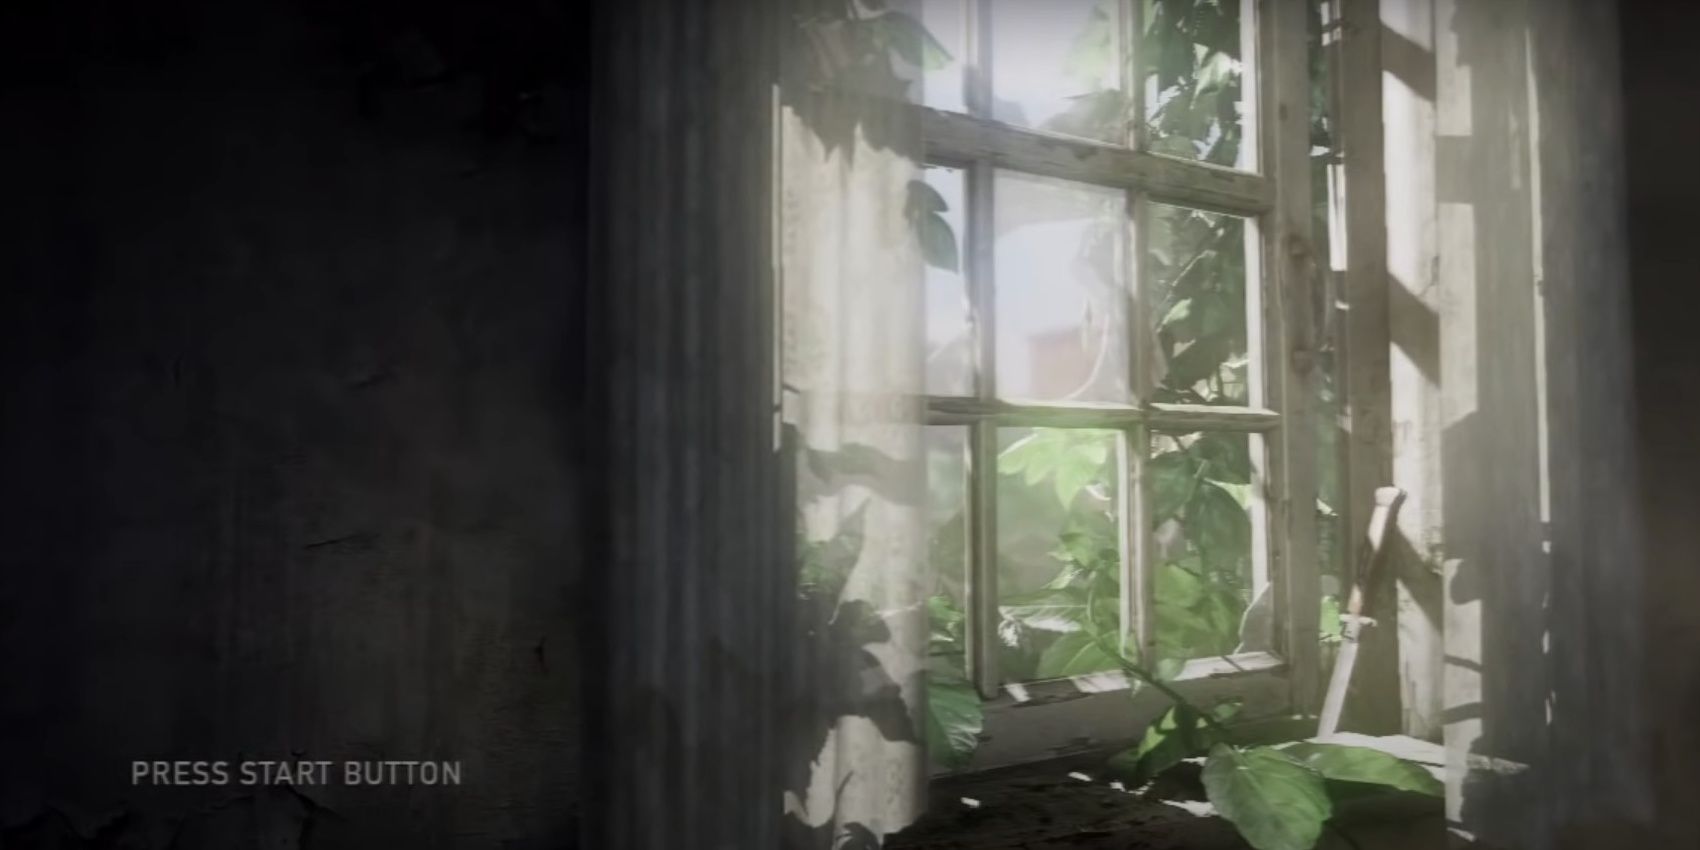 A screenshot of The Last of Us title screen, showing an open window and Ellie’s switchblade.